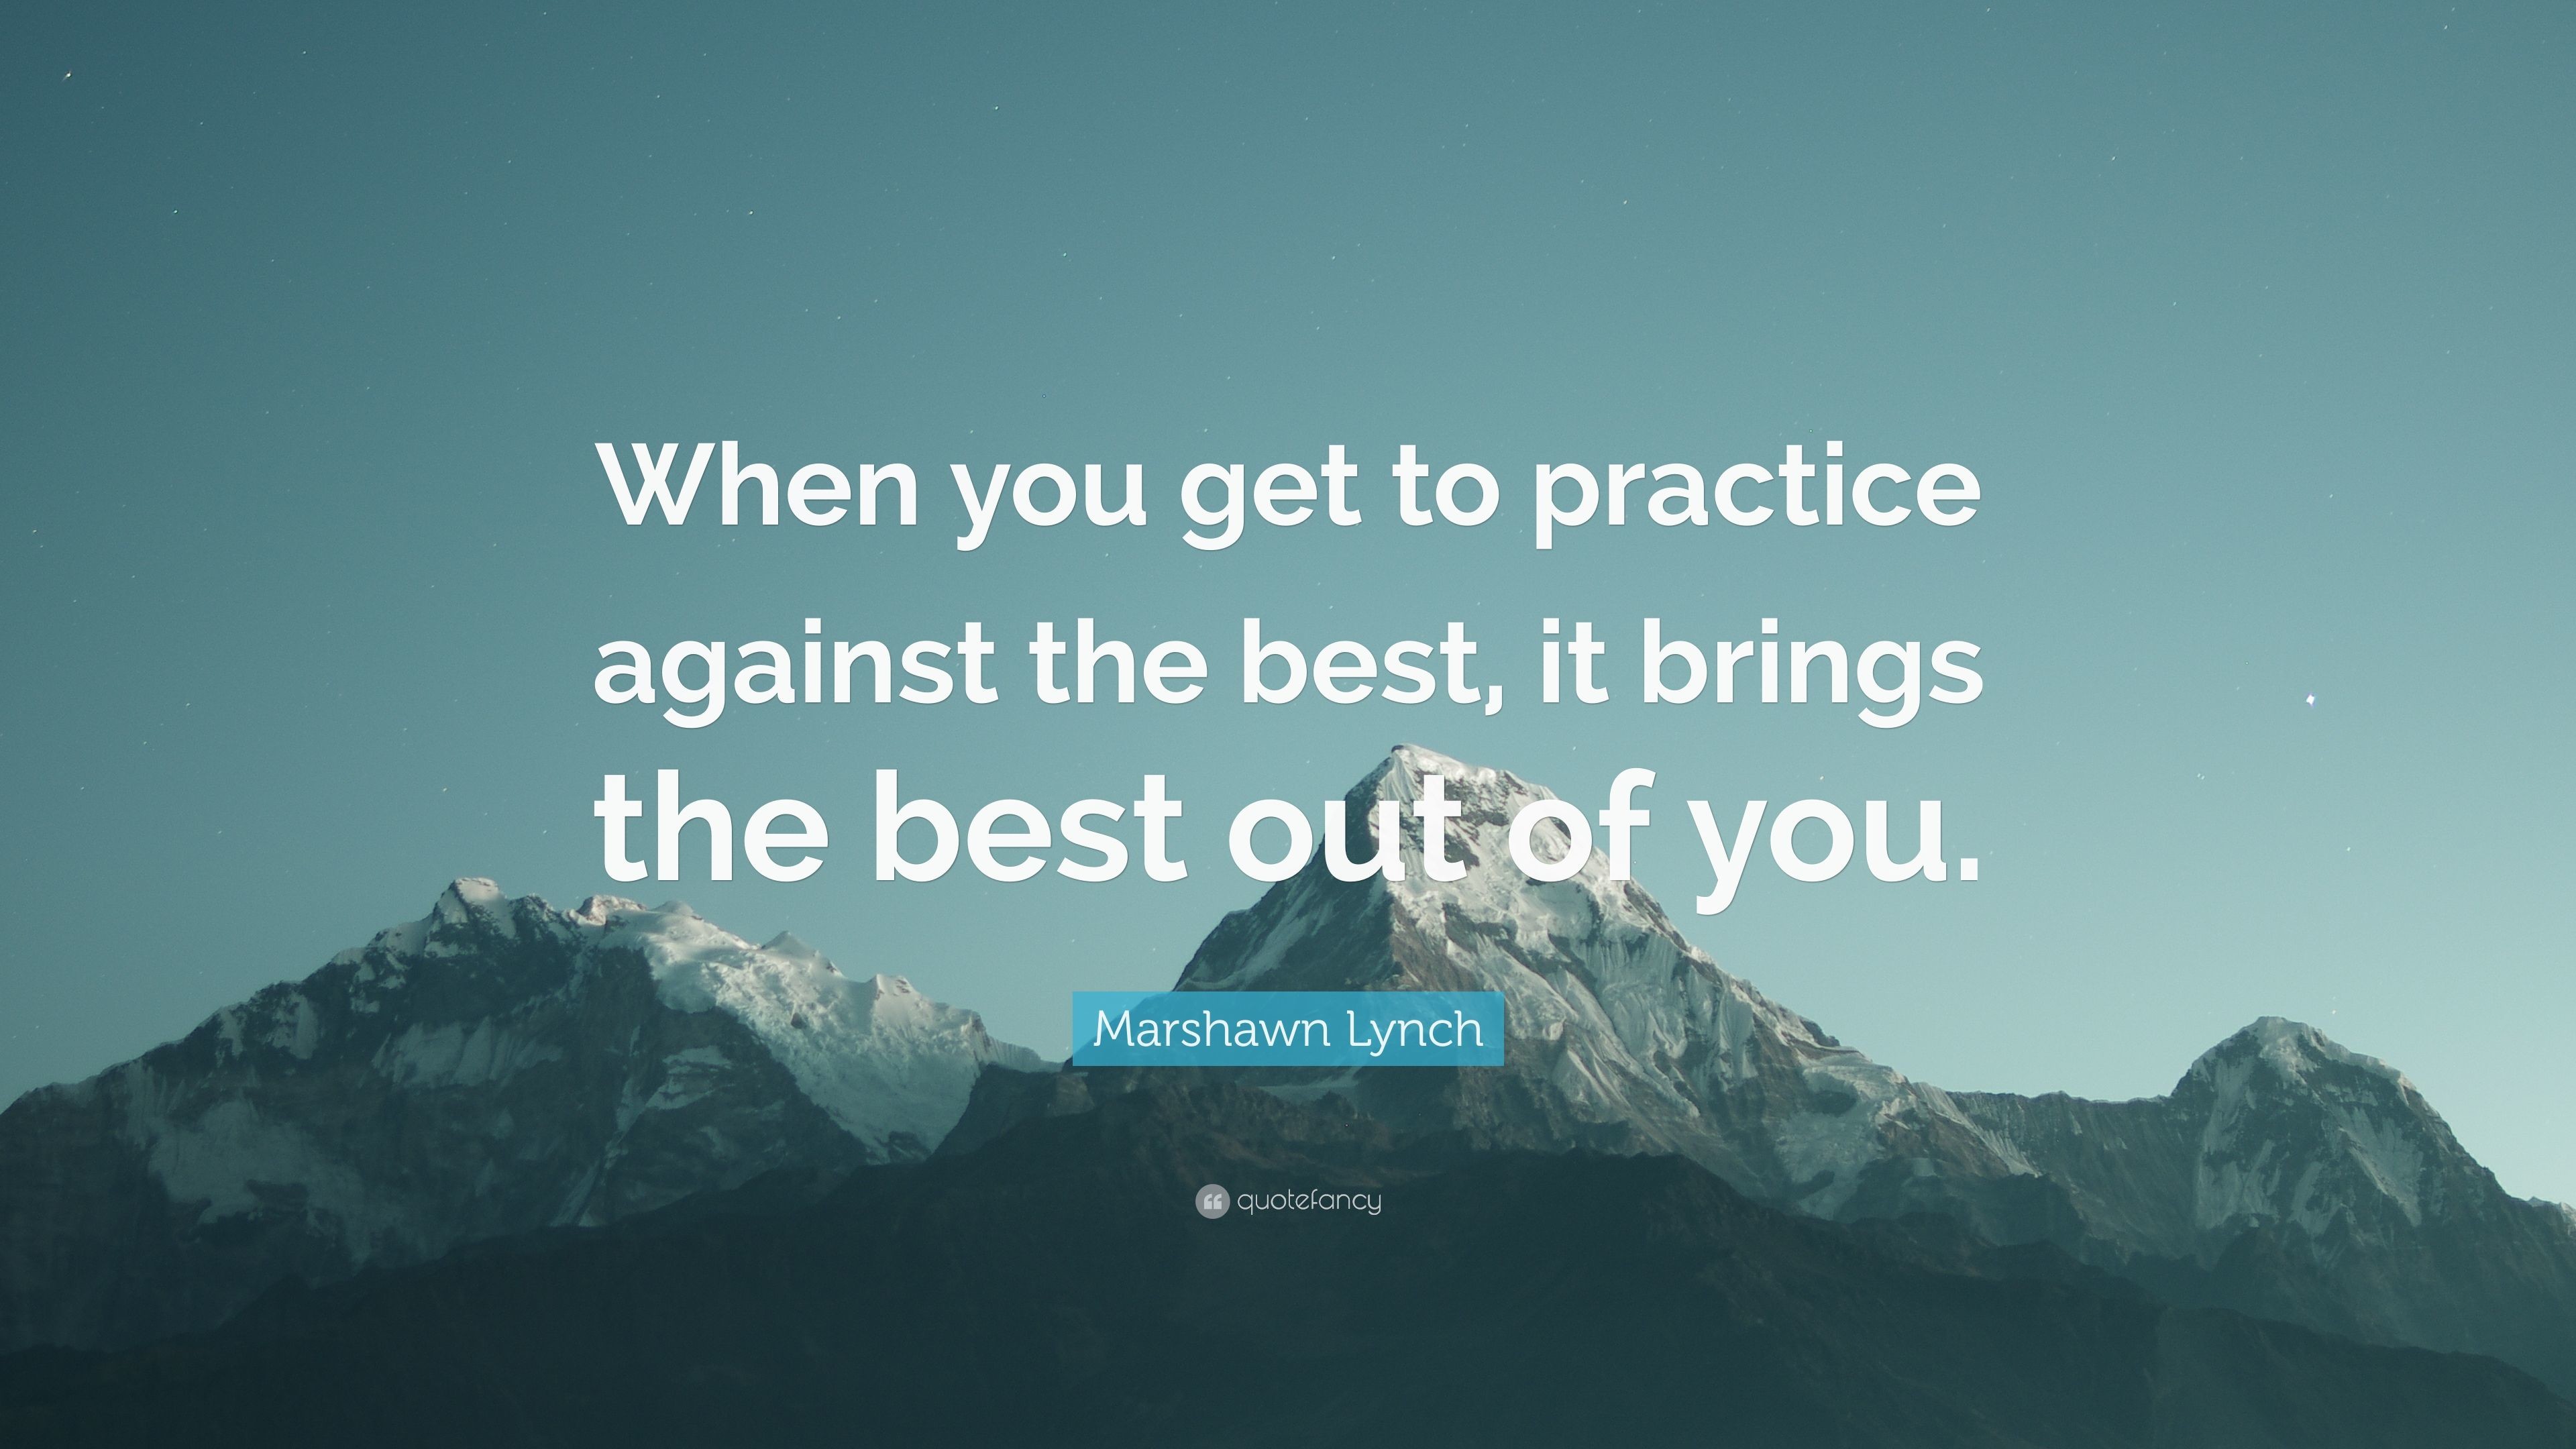 3840x2160 Marshawn Lynch Quote: “When you get to practice against the best, it brings